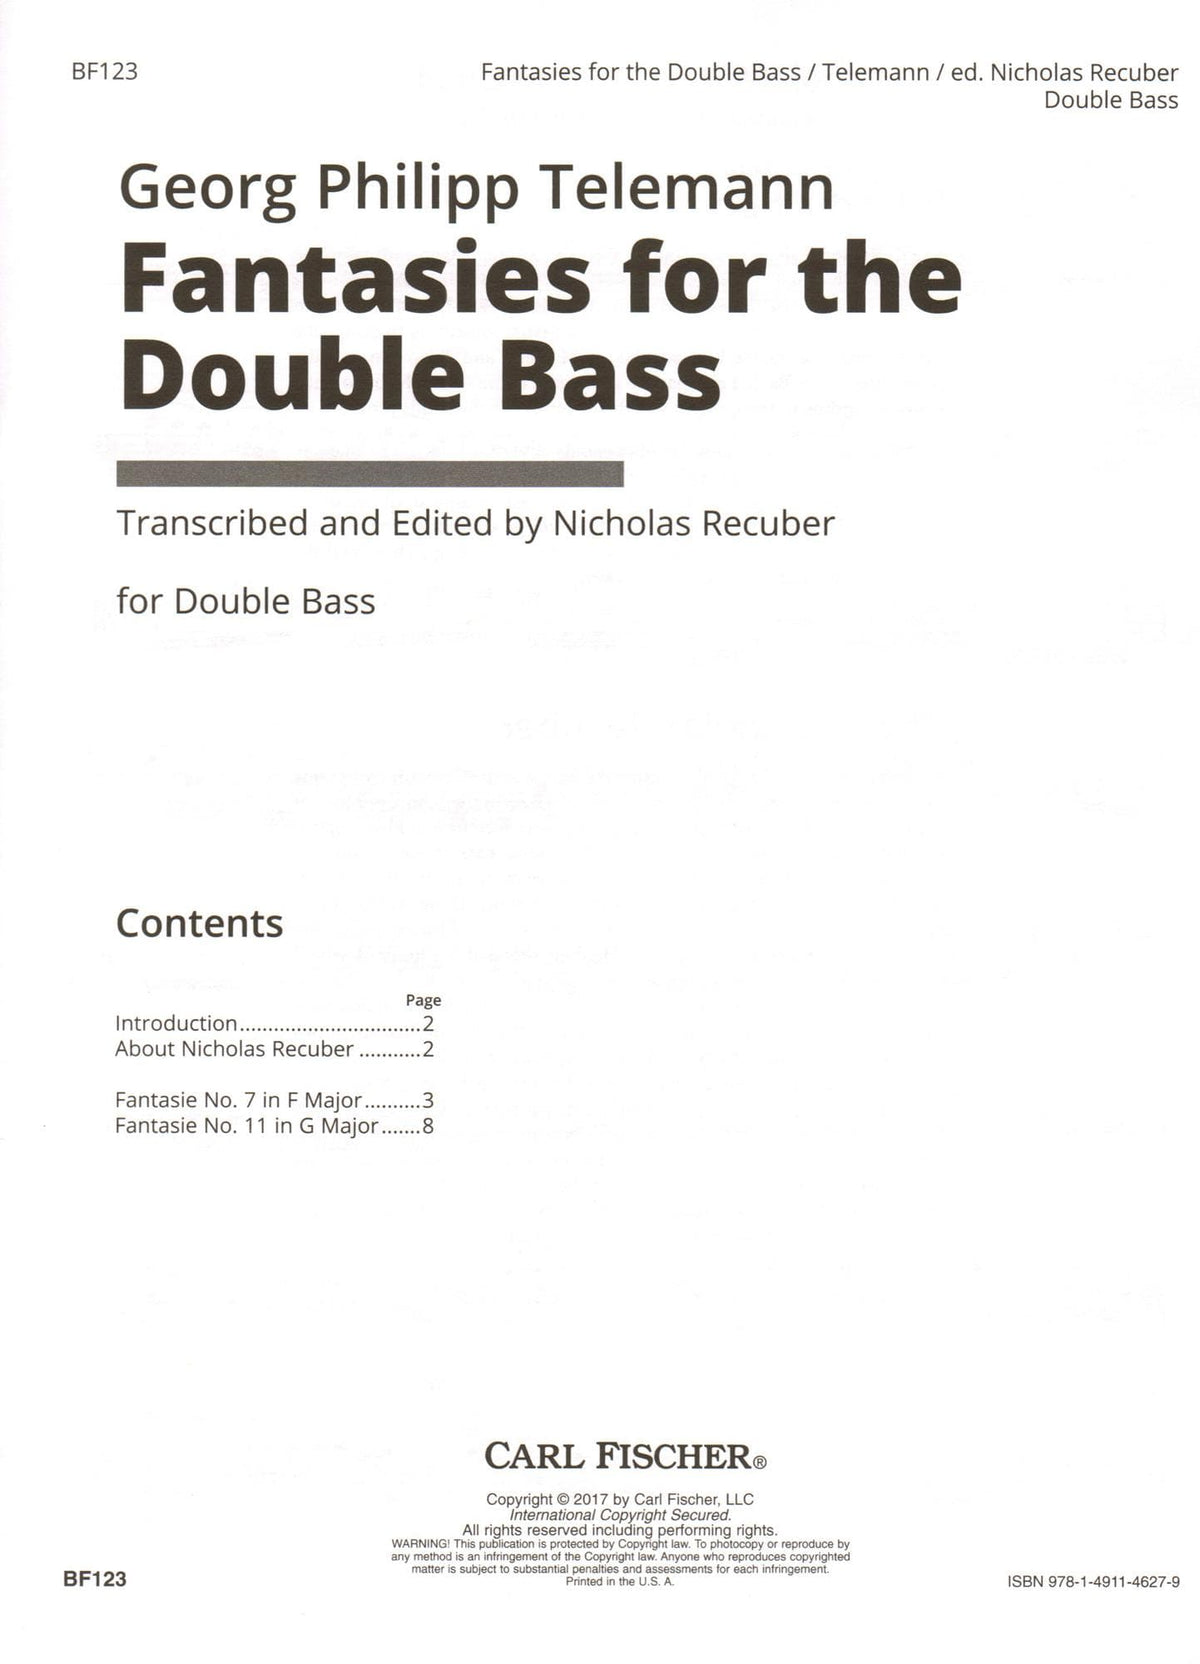 Telemann, G.P. - Fantasies for the Double Bass - for Solo Bass - transcribed and edited by Nicholas Recuber - Carl Fischer